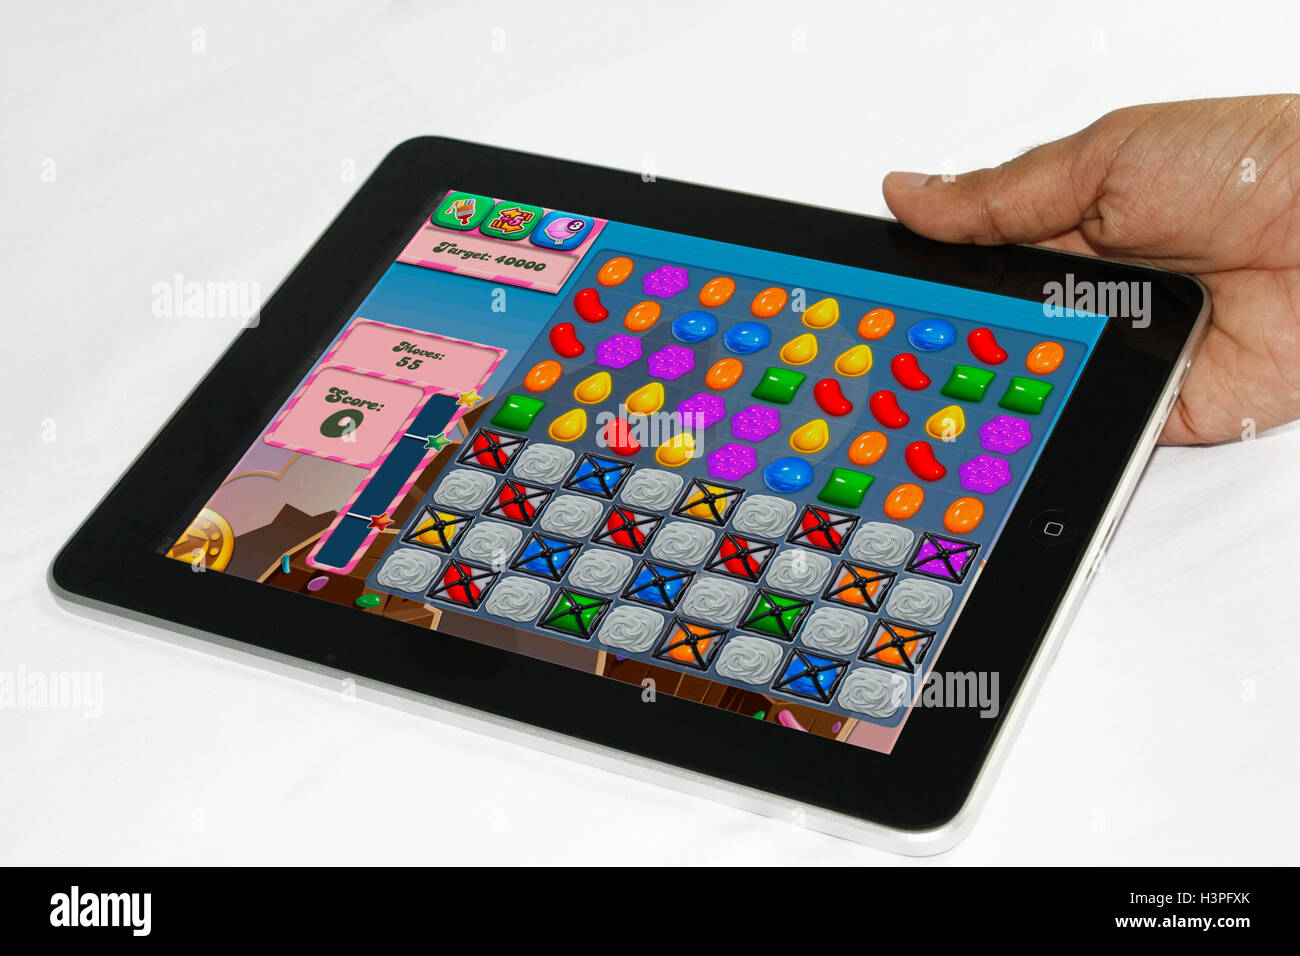 A man holding the iPad with candy crush saga game Stock Photo